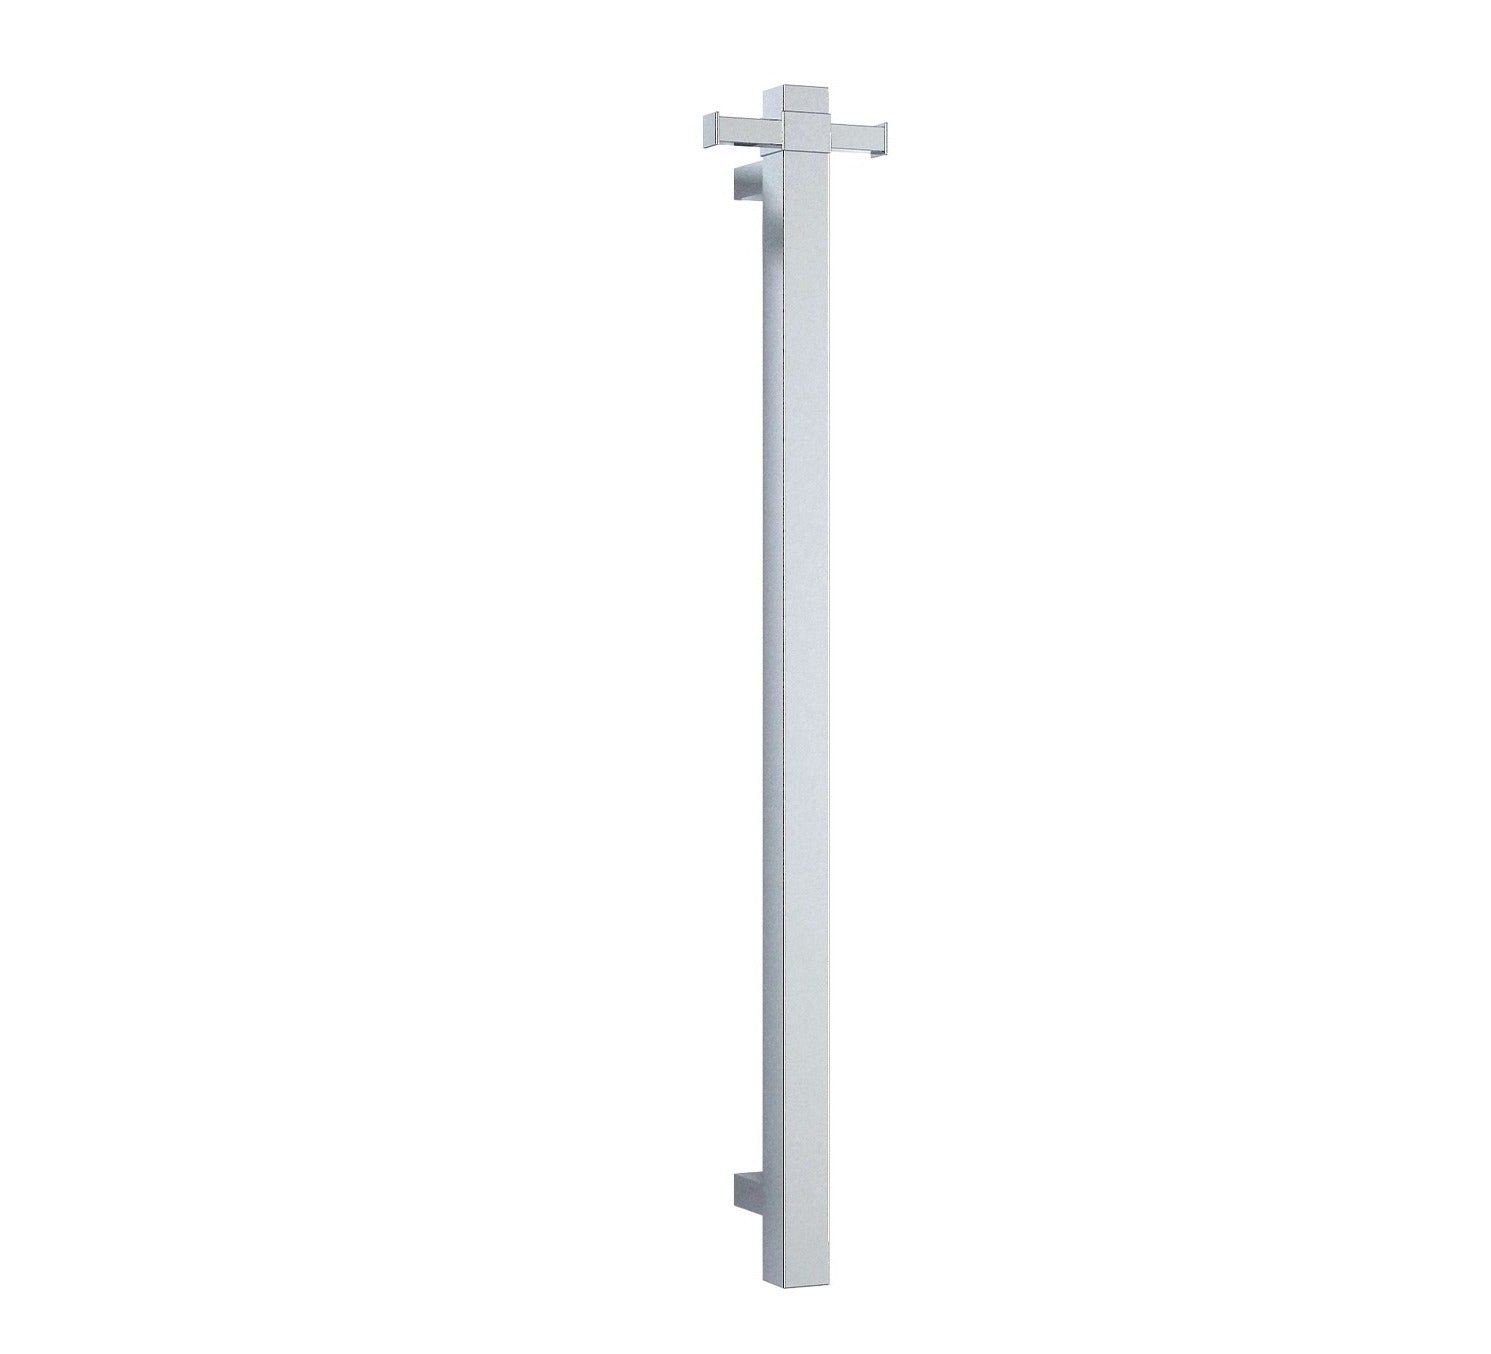 THERMOGROUP SQUARE VERTICAL SINGLE BAR HEATED TOWEL RAIL 900MM